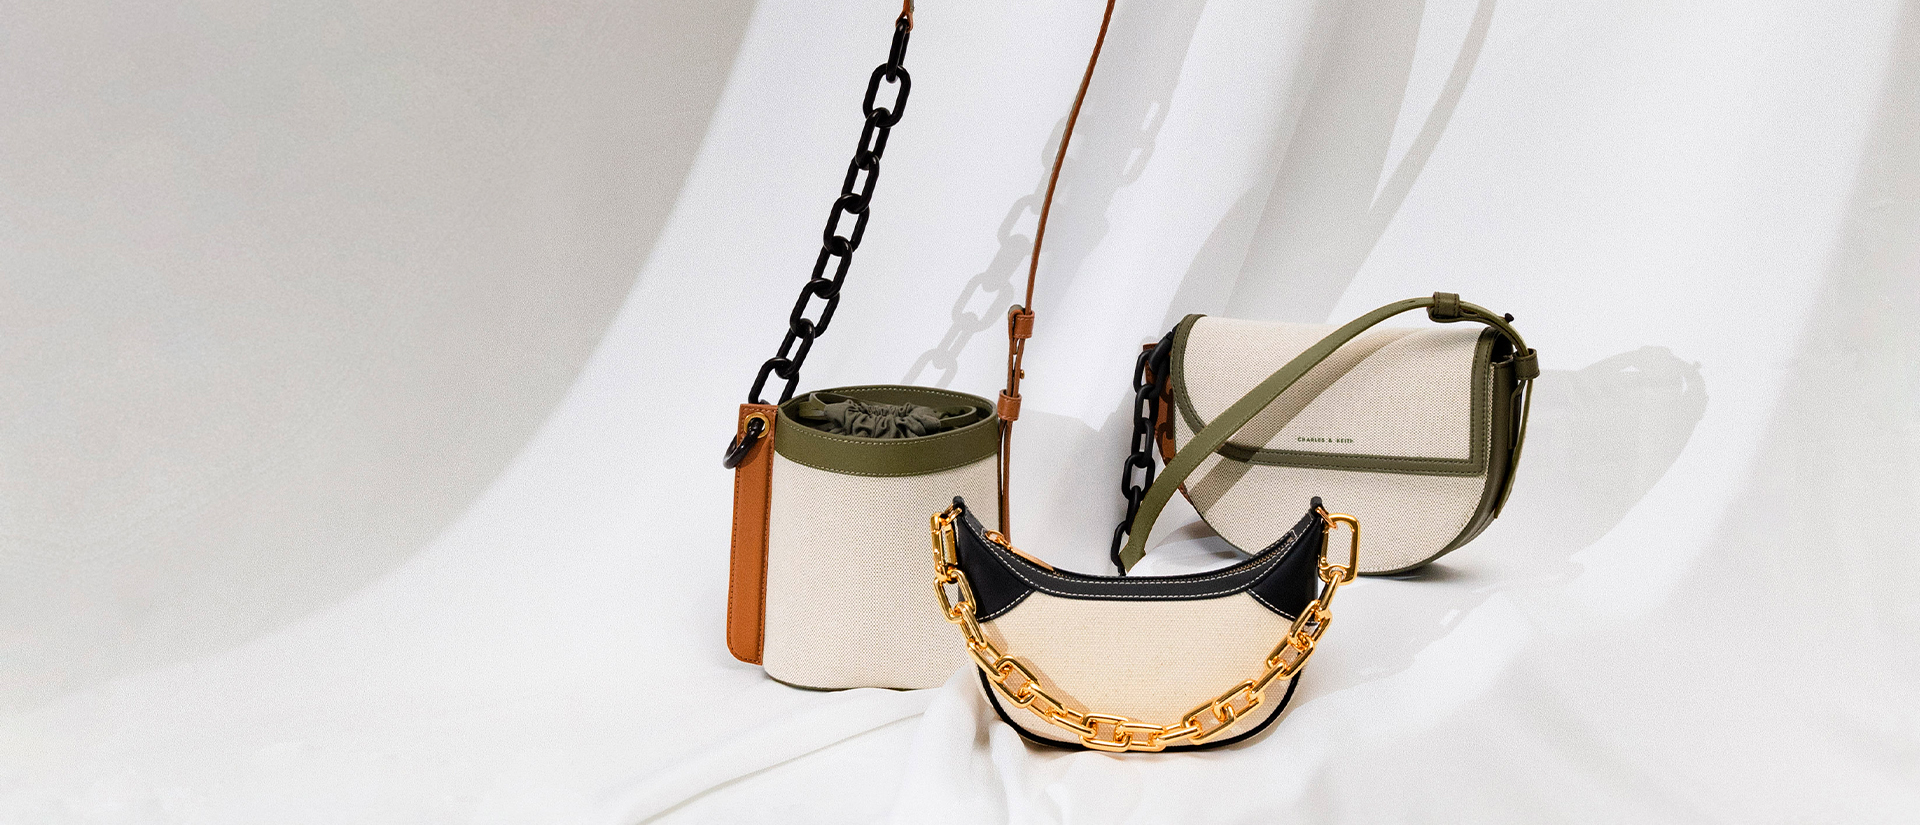 The It-Girls Are Trading Their Minimalist Half Moon Bags For This Playful  Alternative